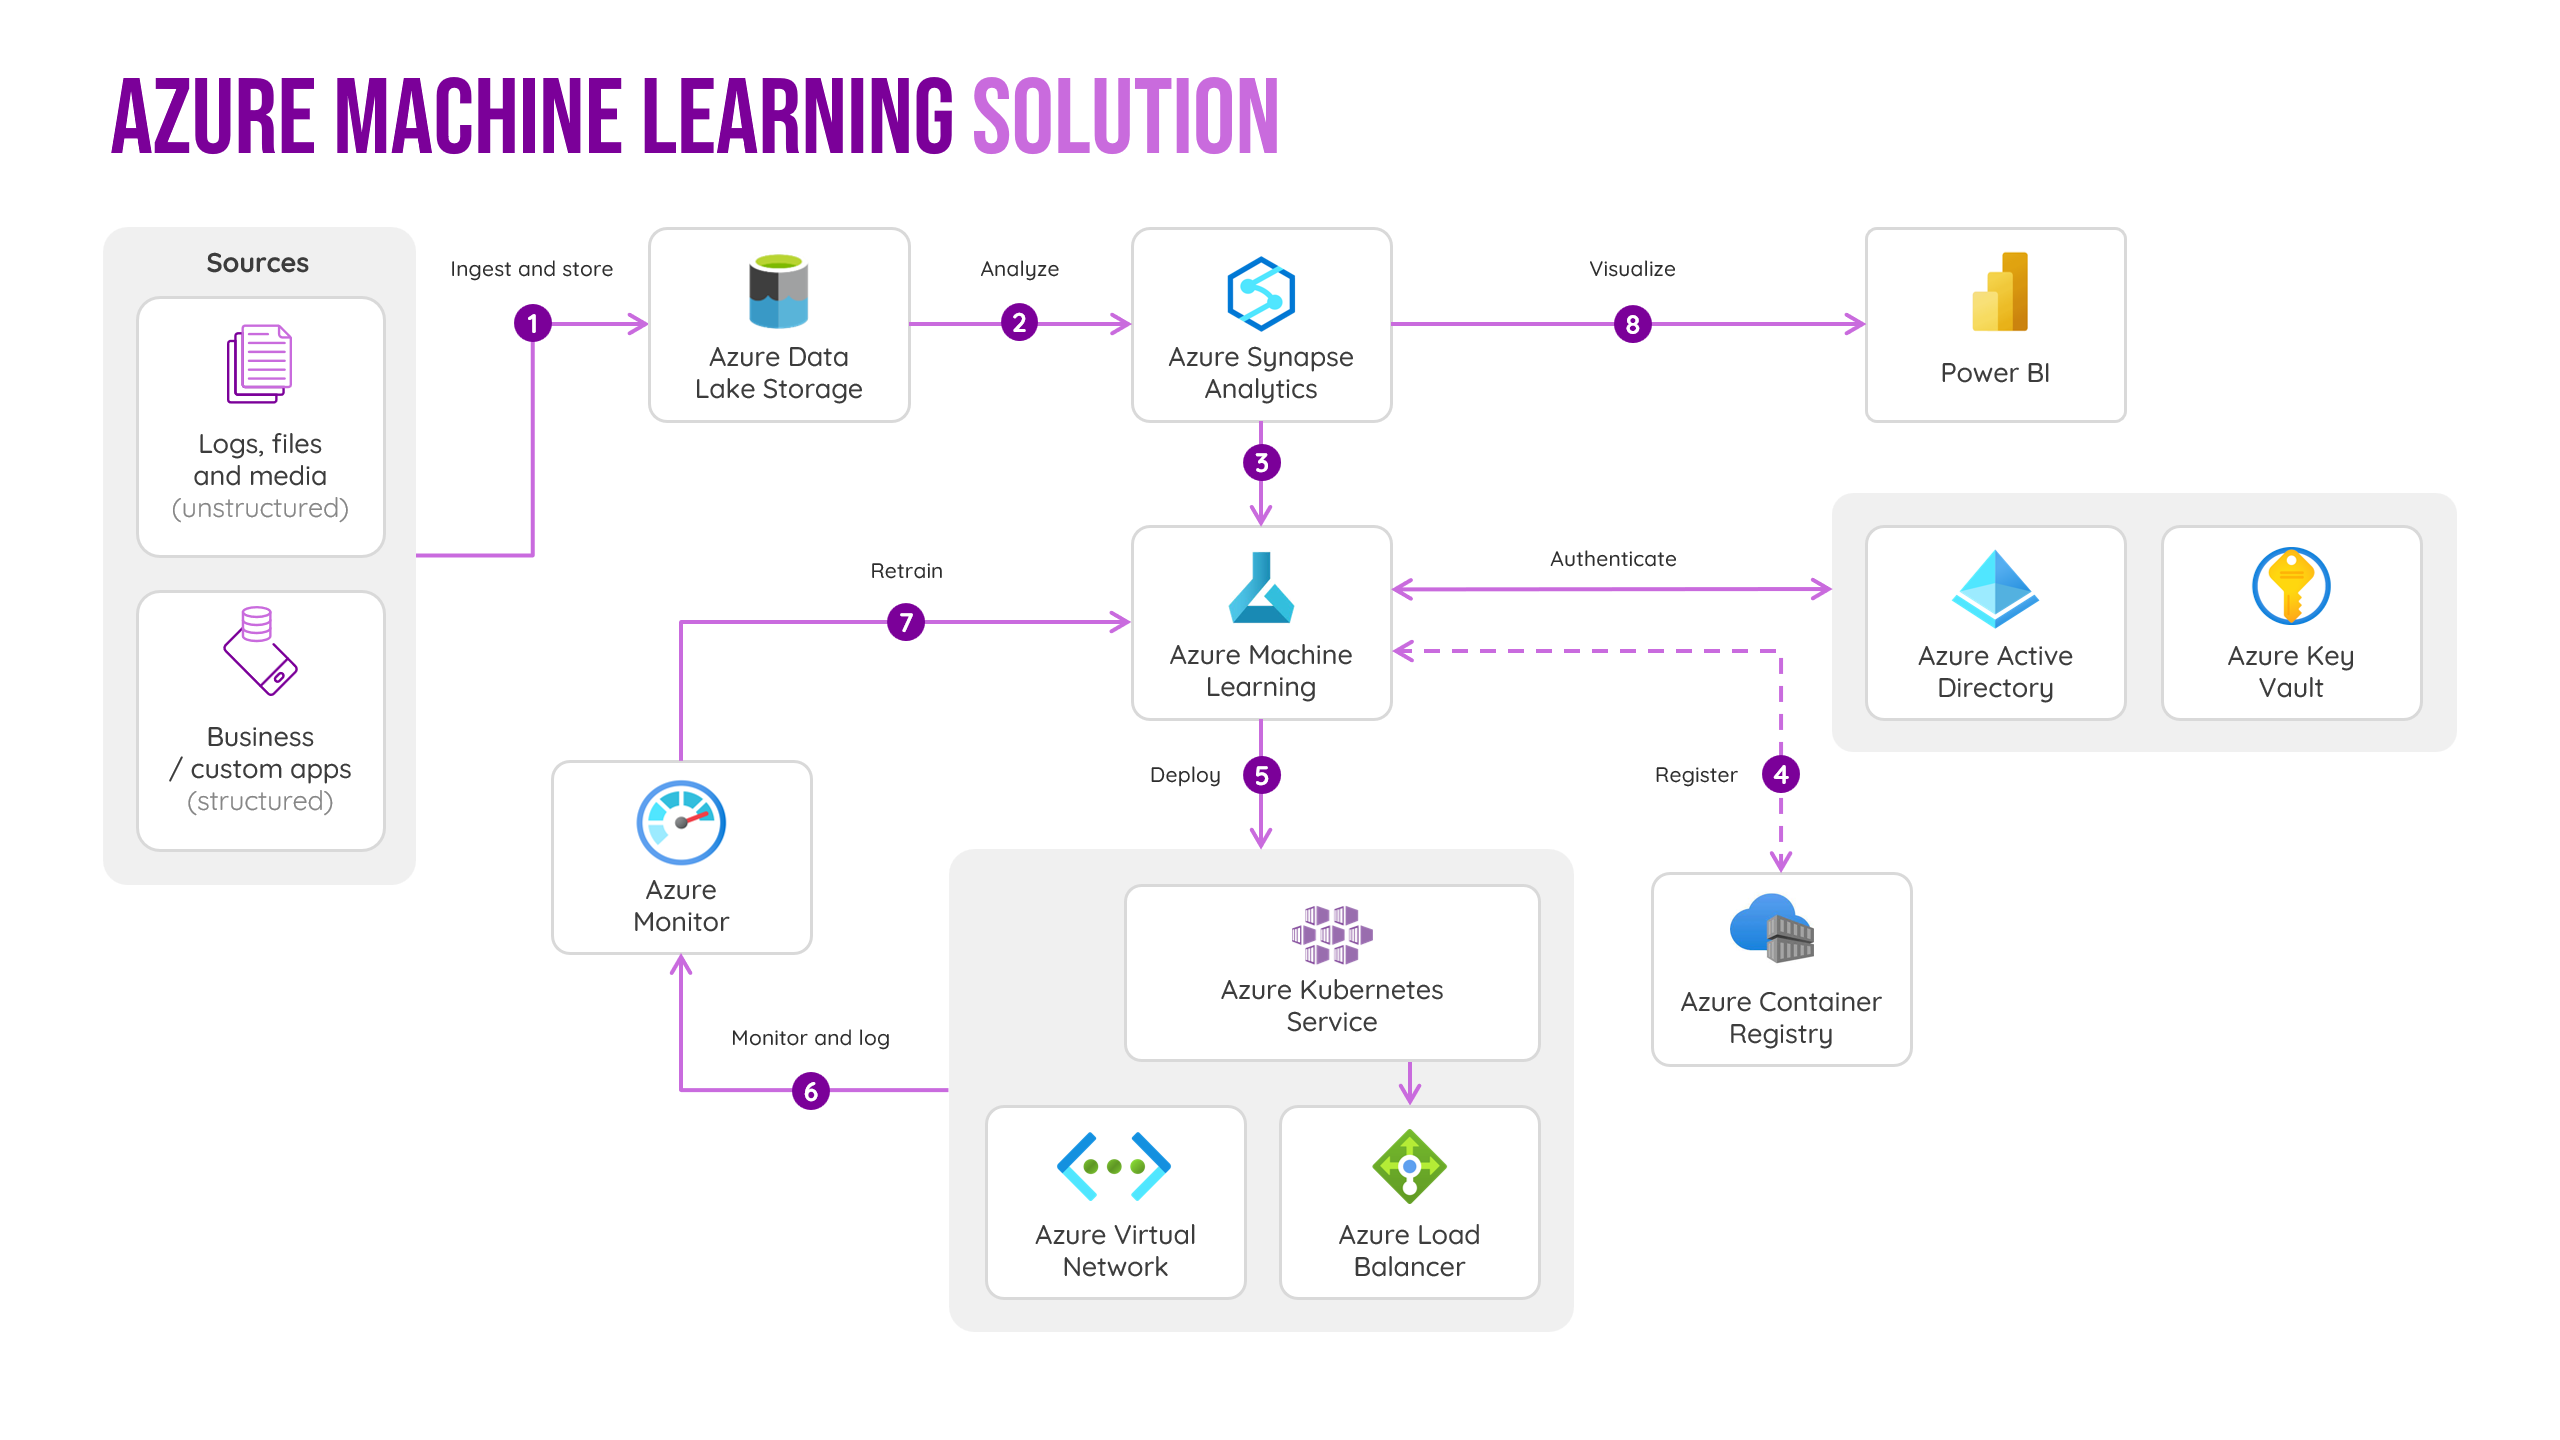 An illustration of an Azure Machine Learning solution